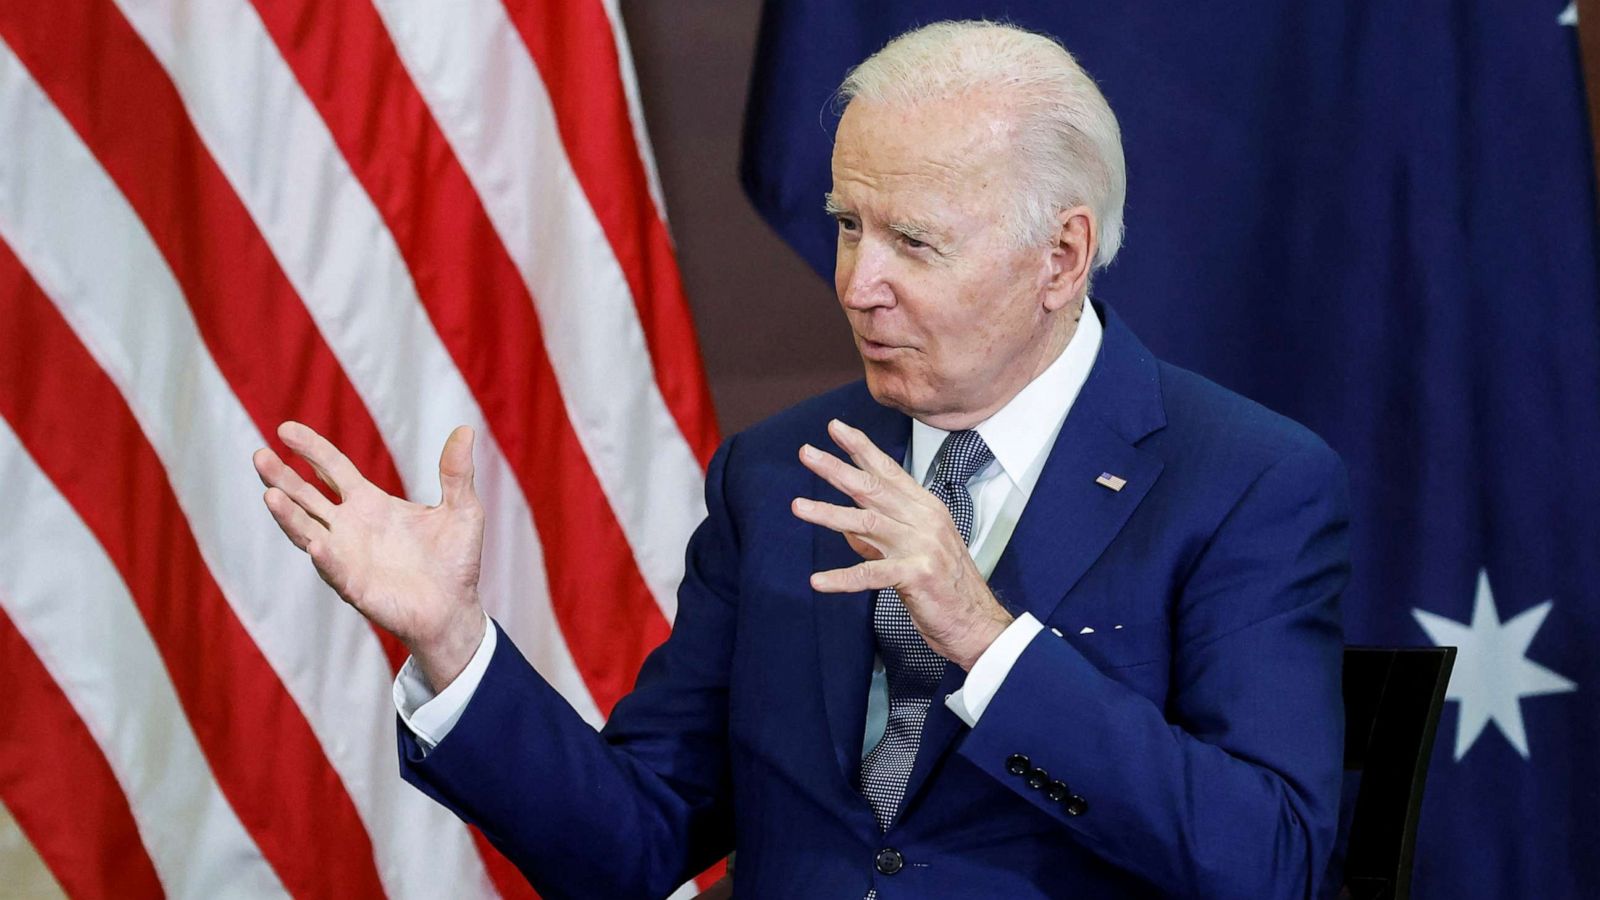 Biden claims no change in policy, but his Taiwan 'gaffe' may be no accident: ANALYSIS - ABC News